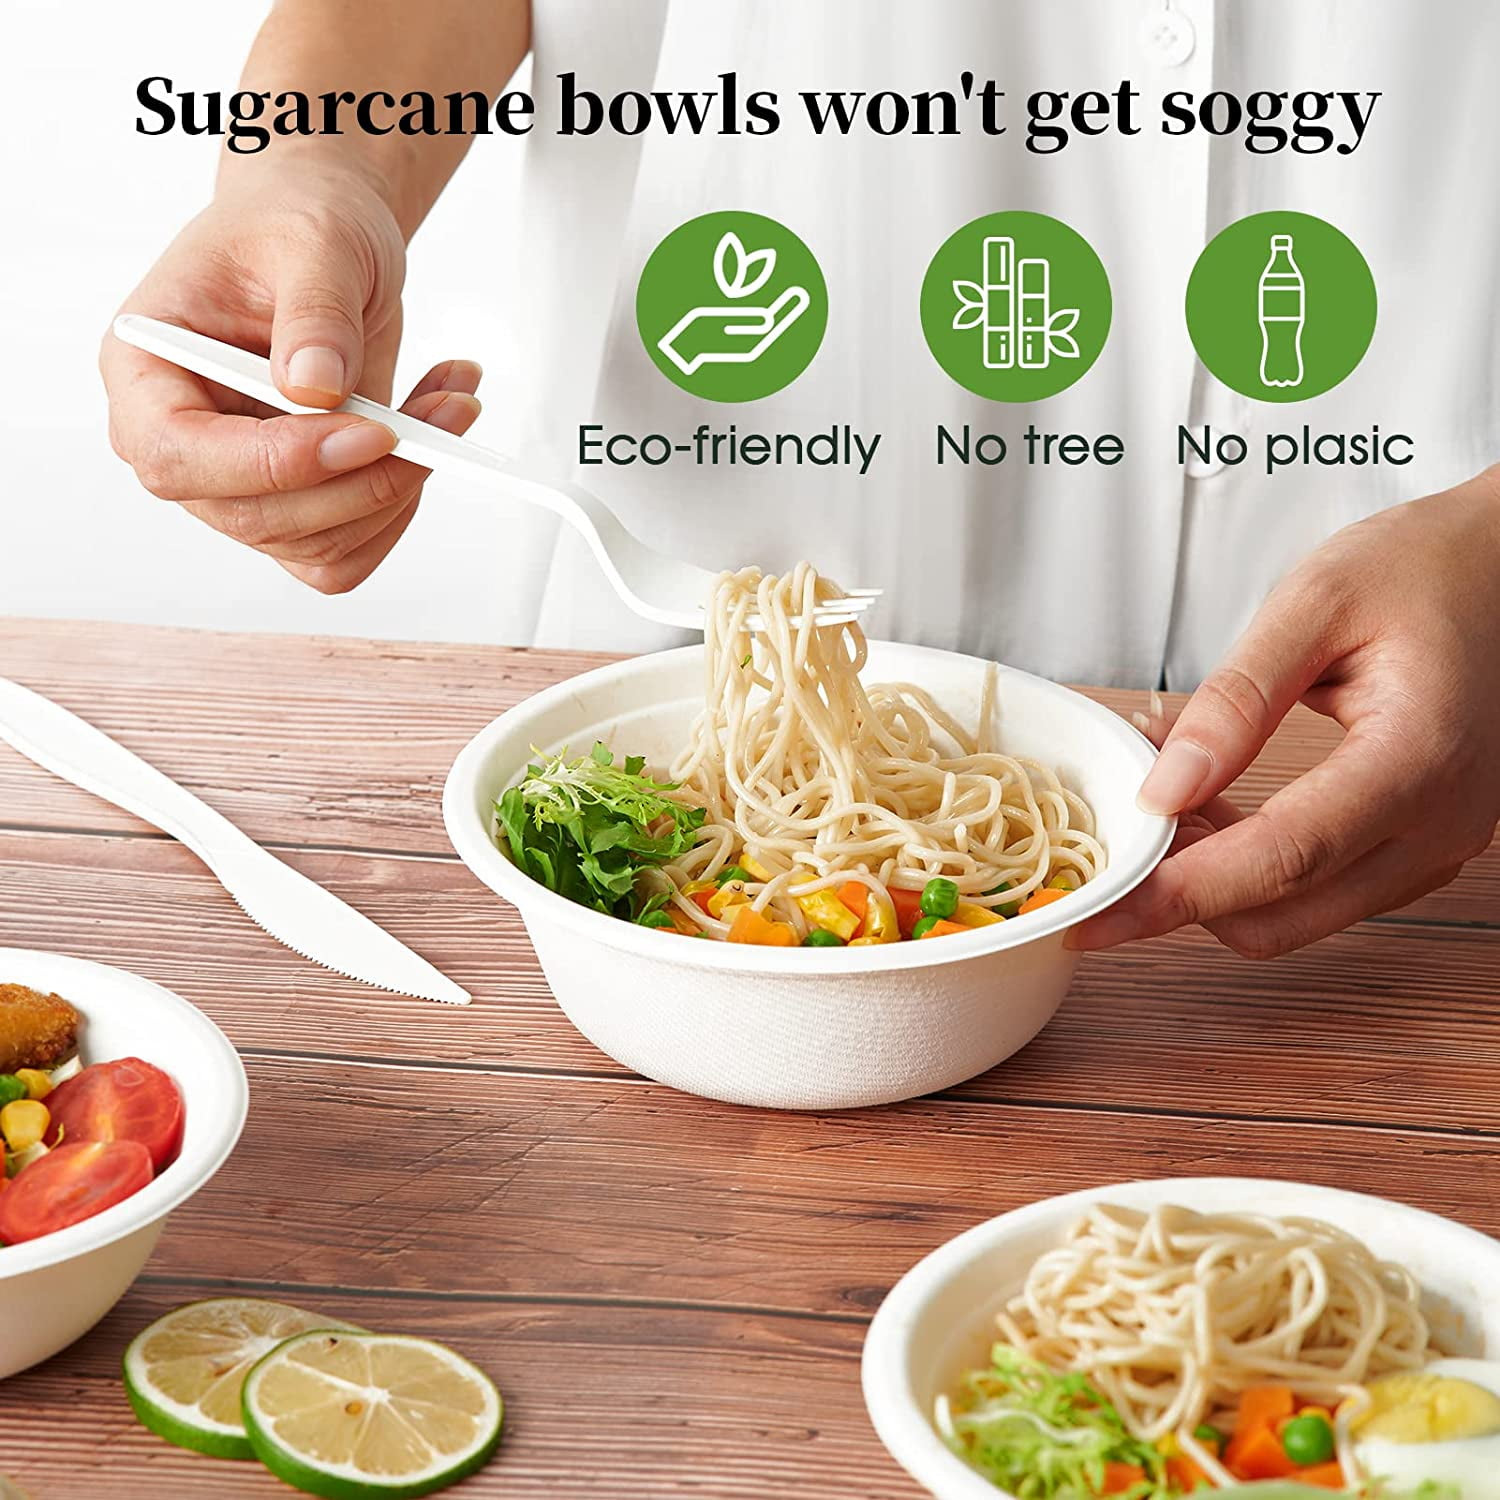  JAYEEY disposable paper bowls 35oz 3 compartments bowls with  lids, Sugarcane Bowls take away food containers For Snack, Dessert, Meal  Prep Bowls 50 PACK : Health & Household